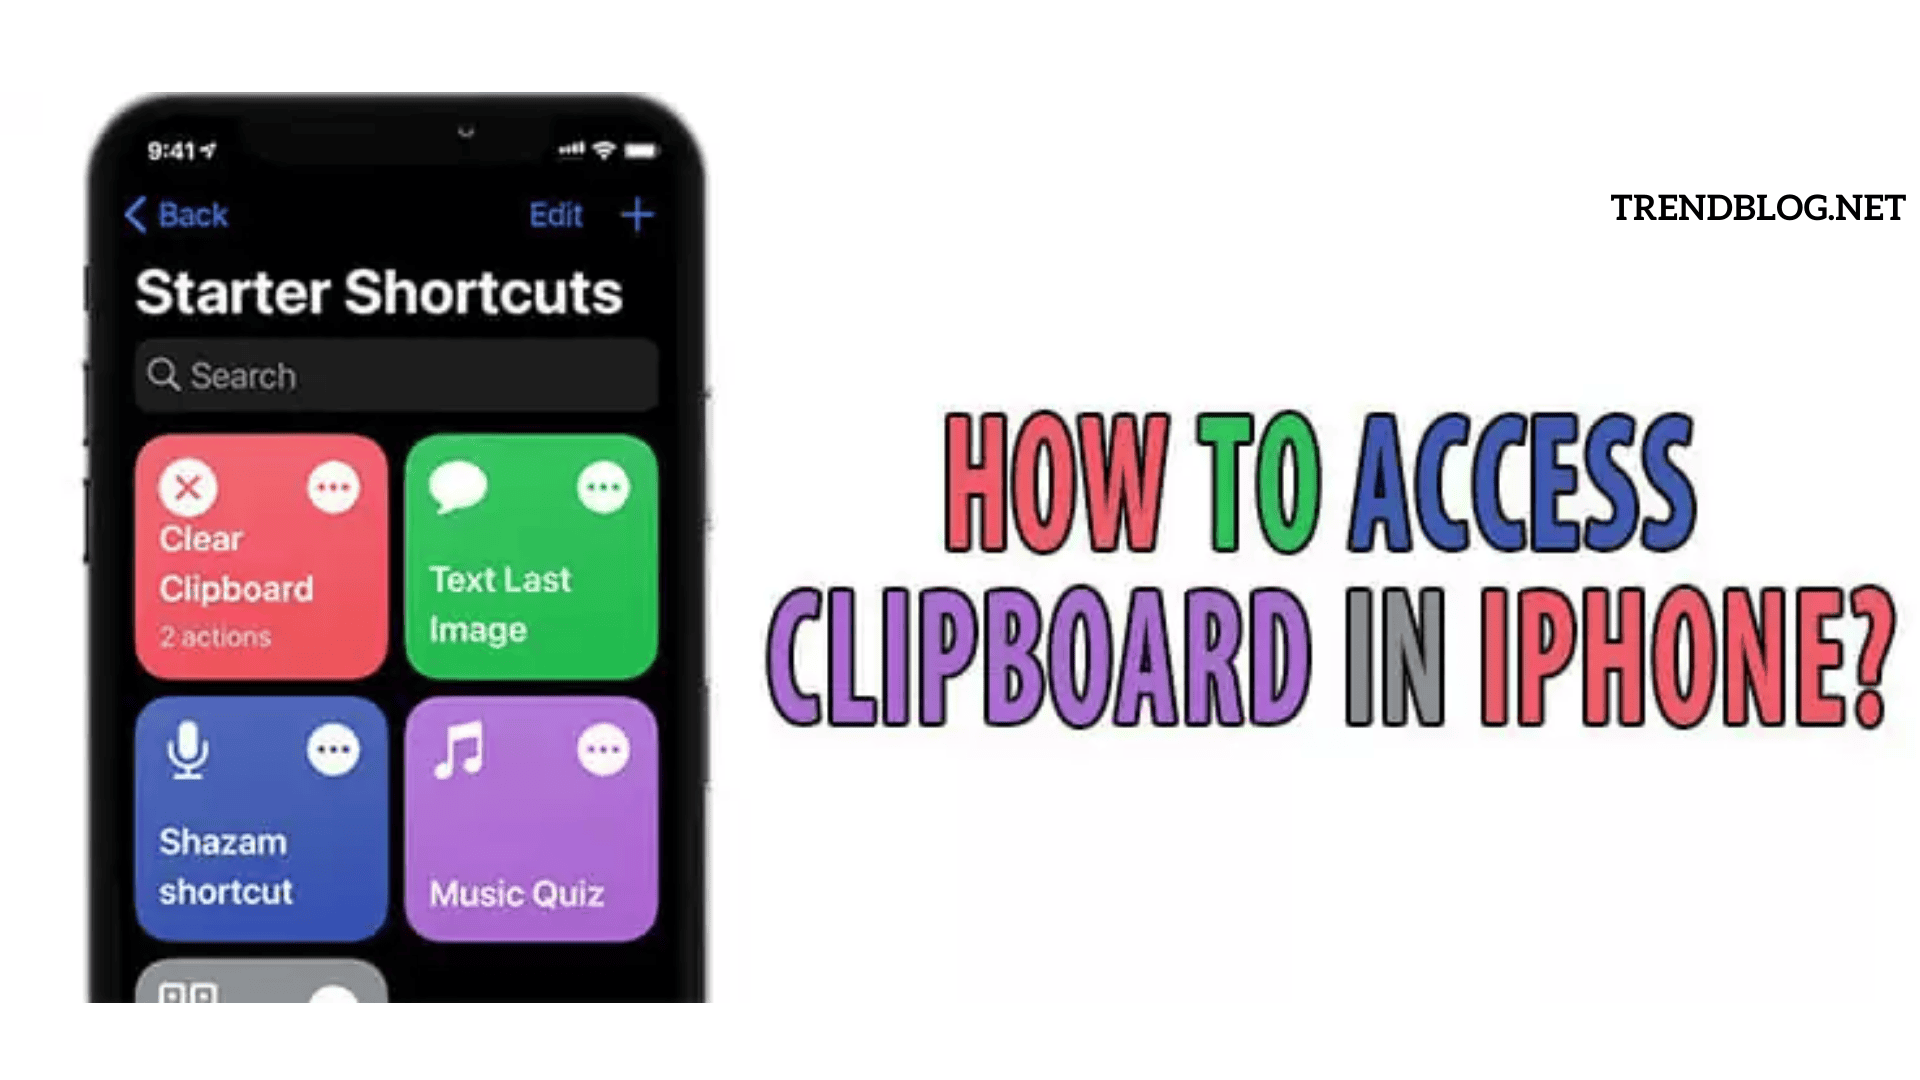  What are the 2 Tremendous Ways to Know How to Access Clipboard on iPhone?